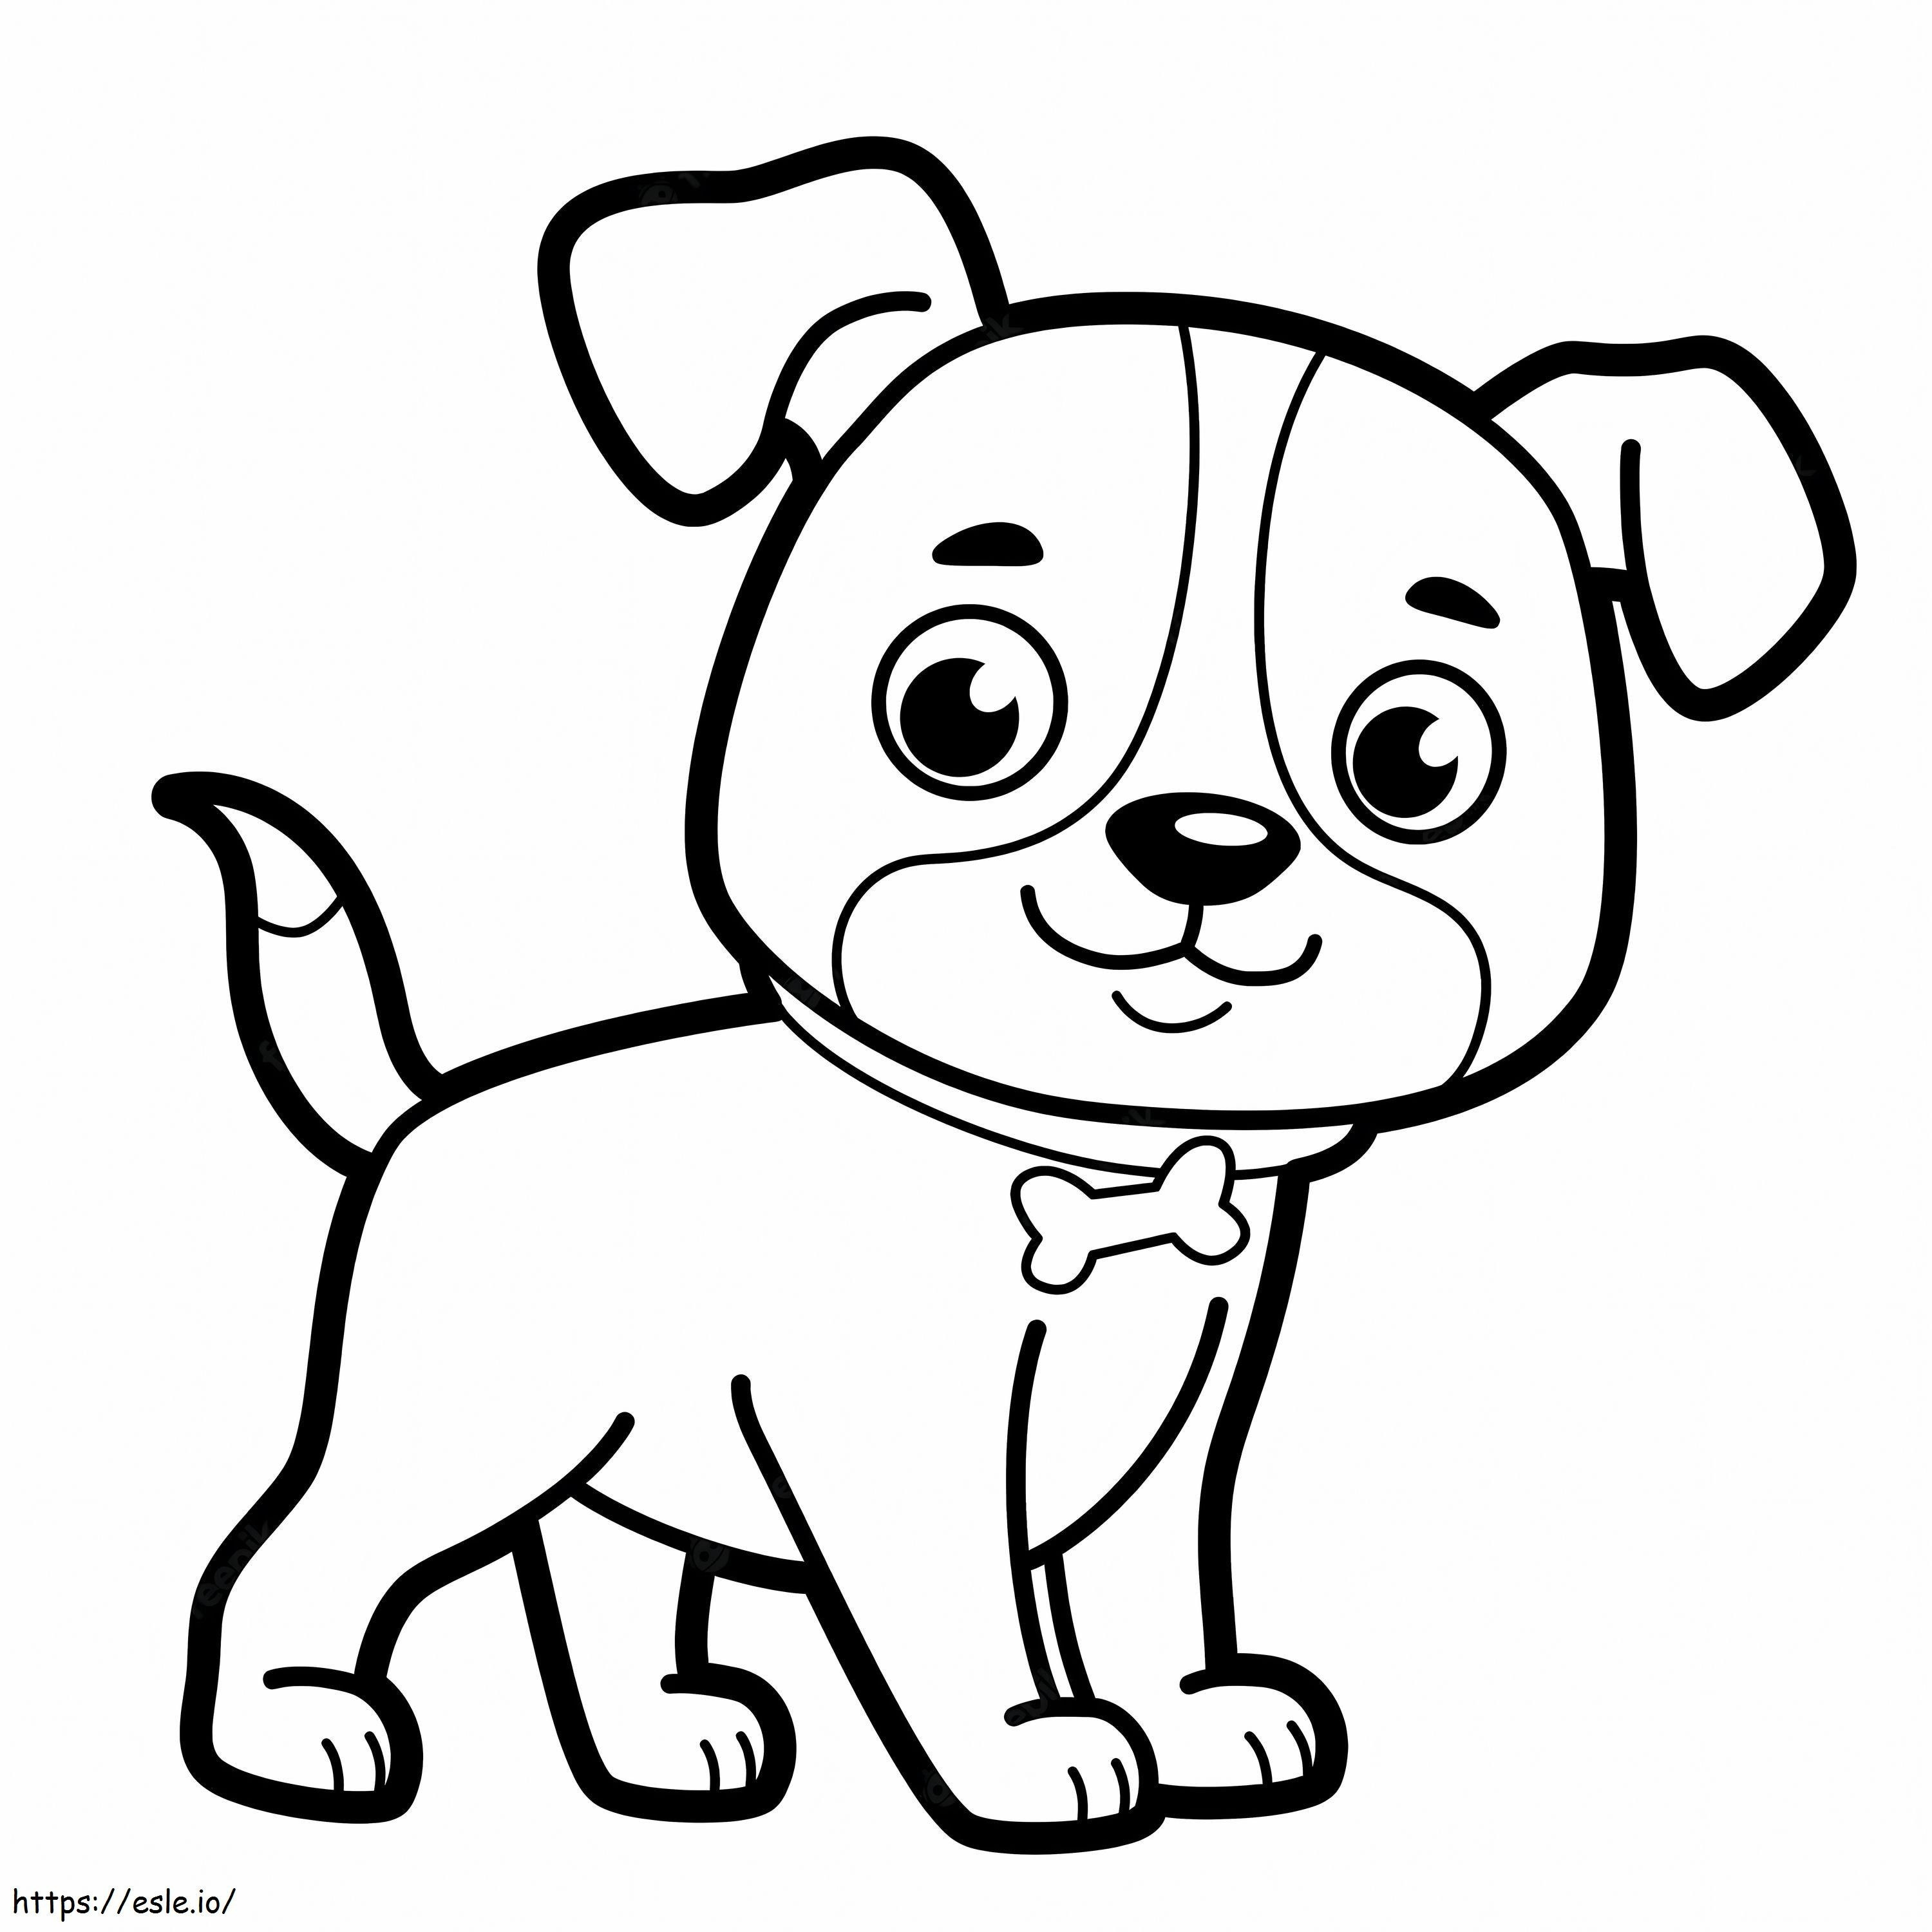 Smiling Dog coloring page